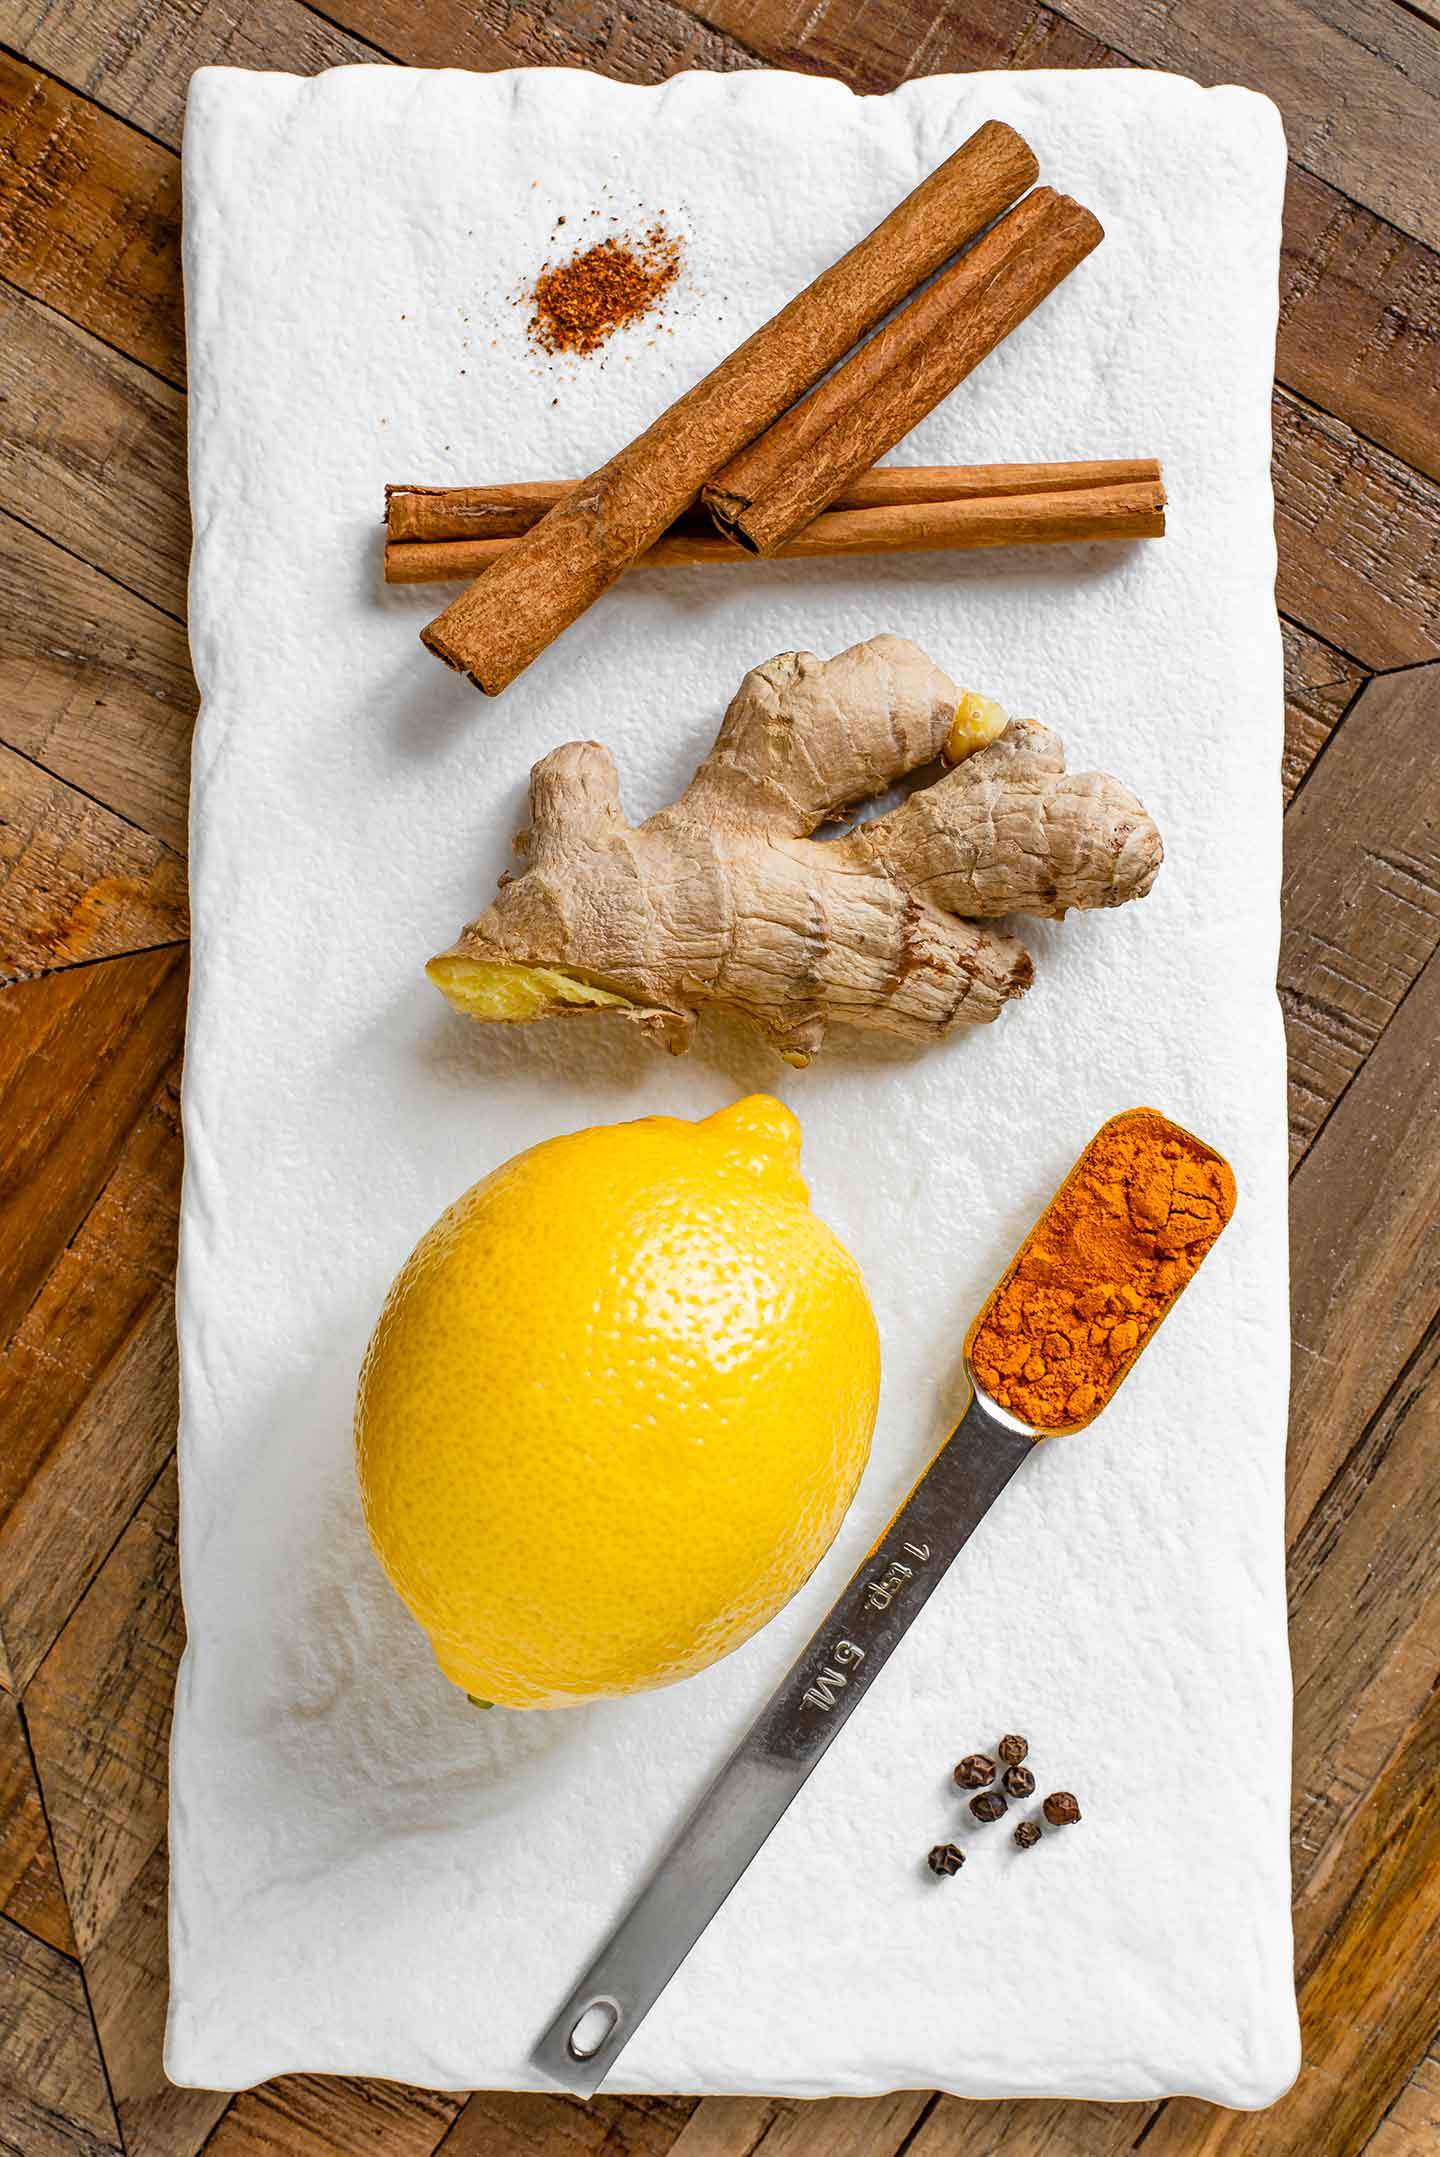 Top down view of ingredients. Fresh ginger, a lemon, cinnamon sticks, ground turmeric, black peppercorns, and ground cayenne pepper are displayed on a white tray.